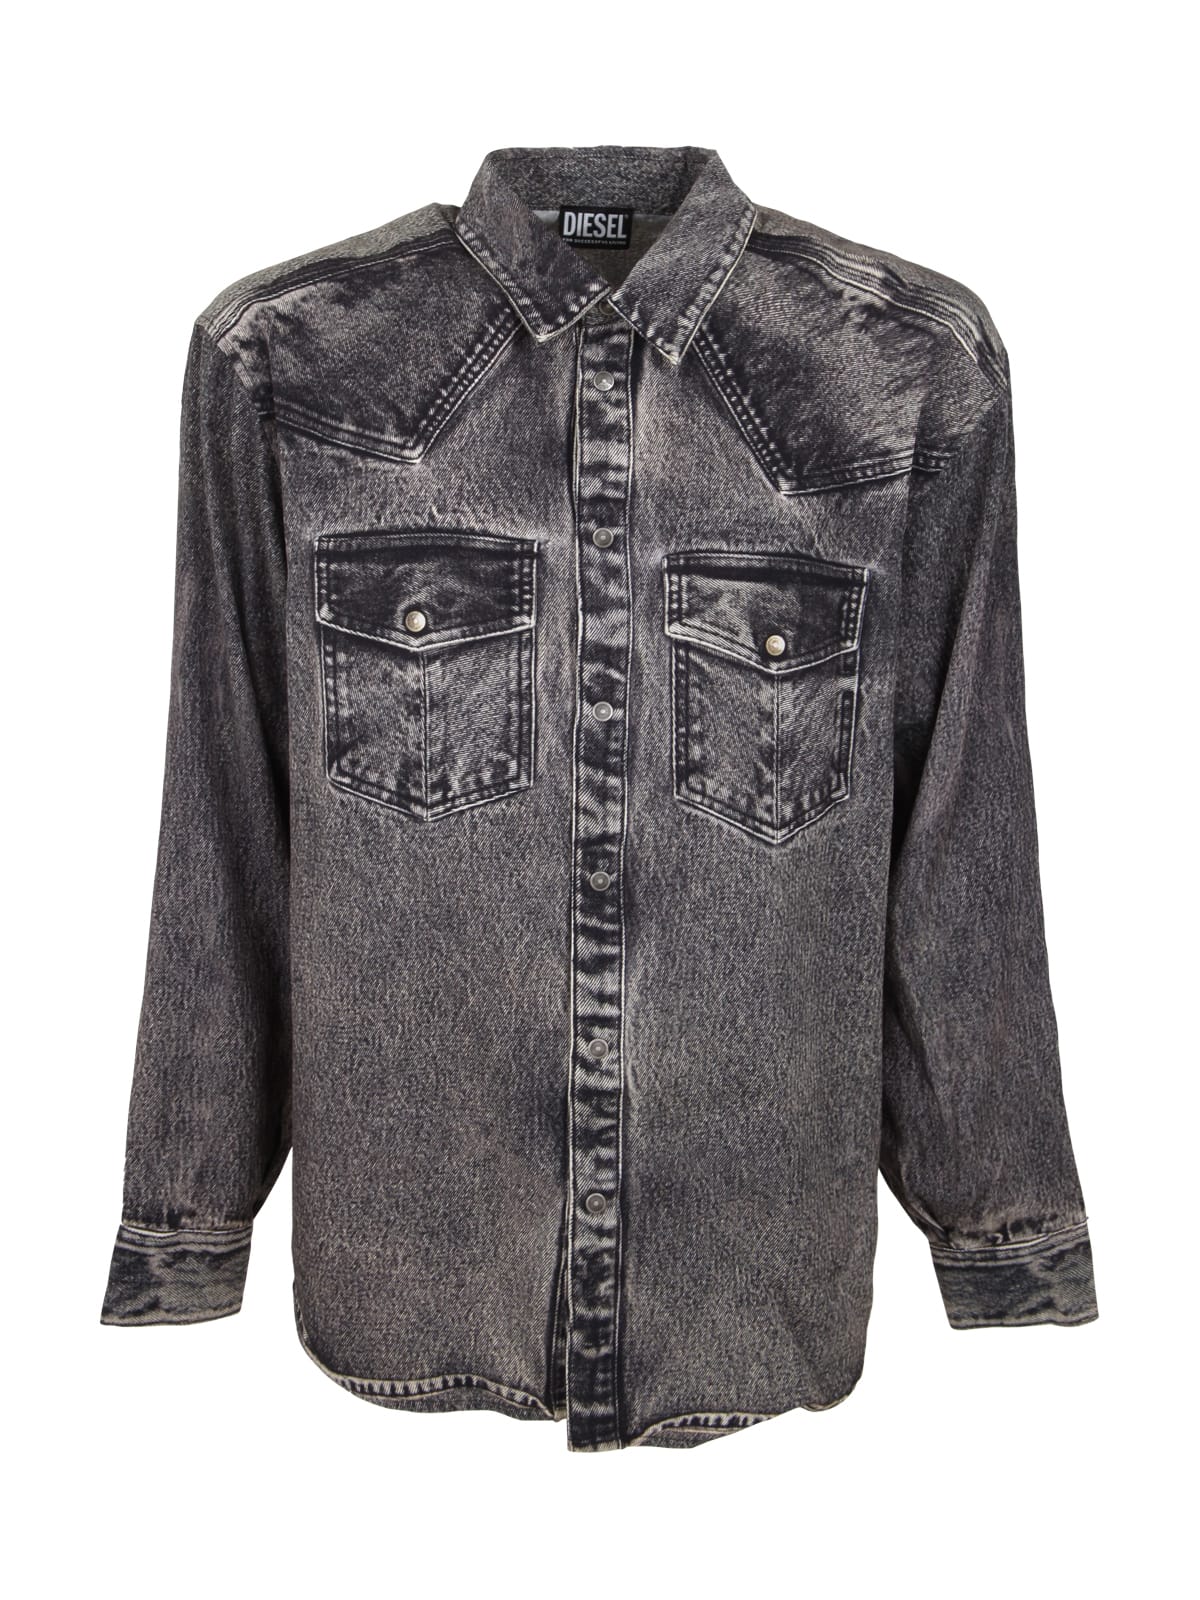 DIESEL GILS DENIM SHIRT WITH TWO POCKETS